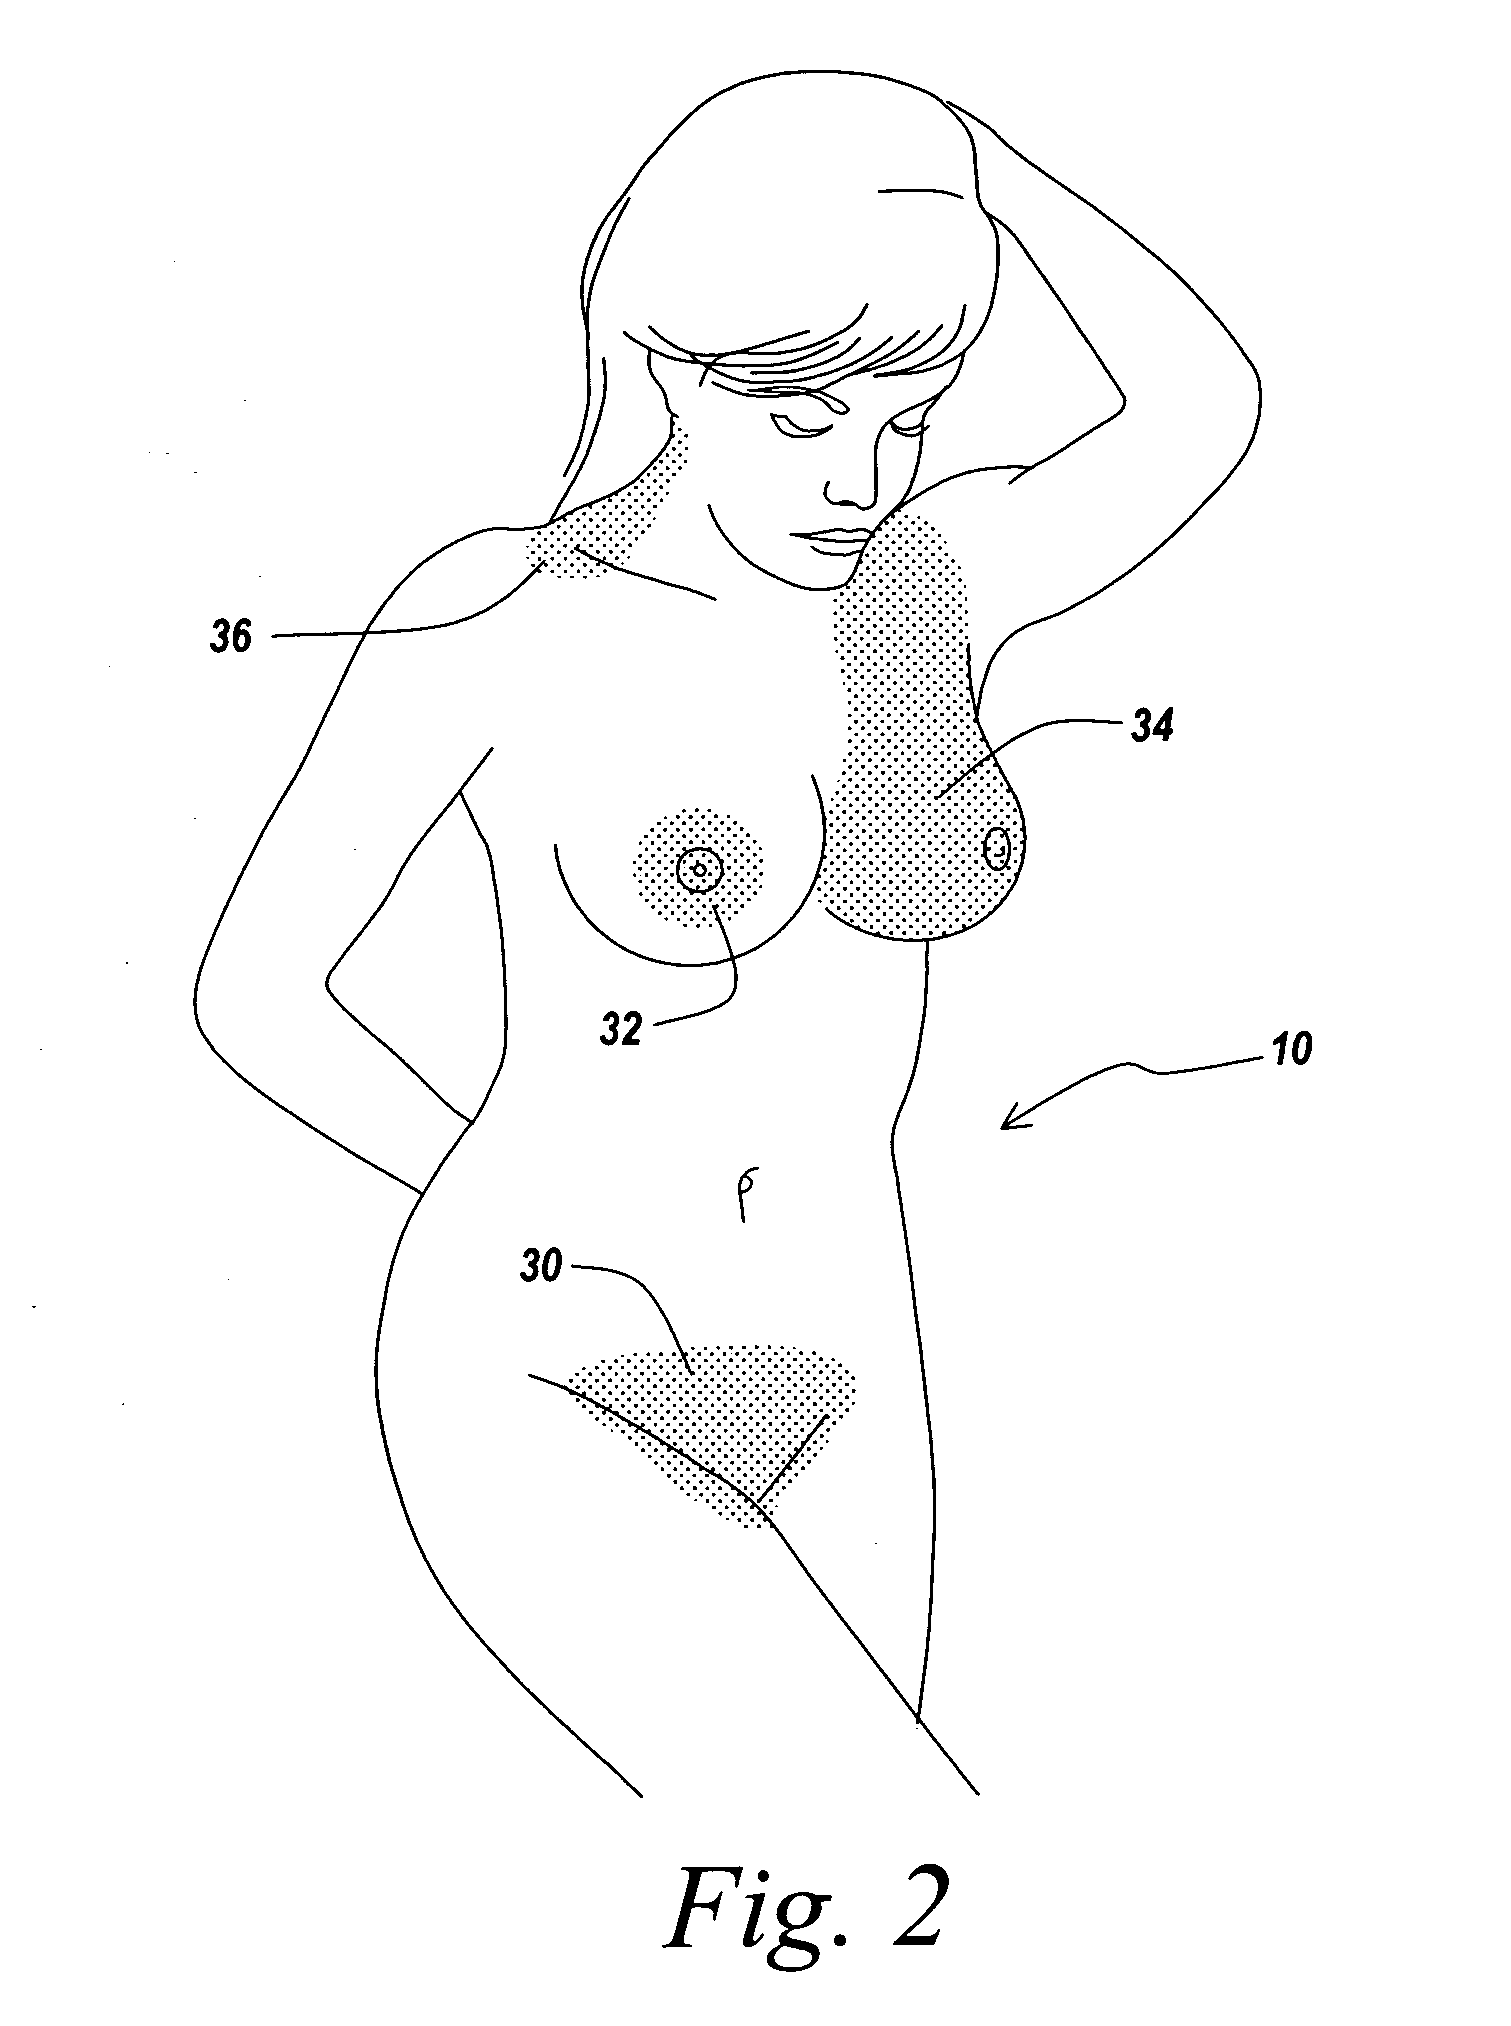 Lingerie-attached human arousal indicator